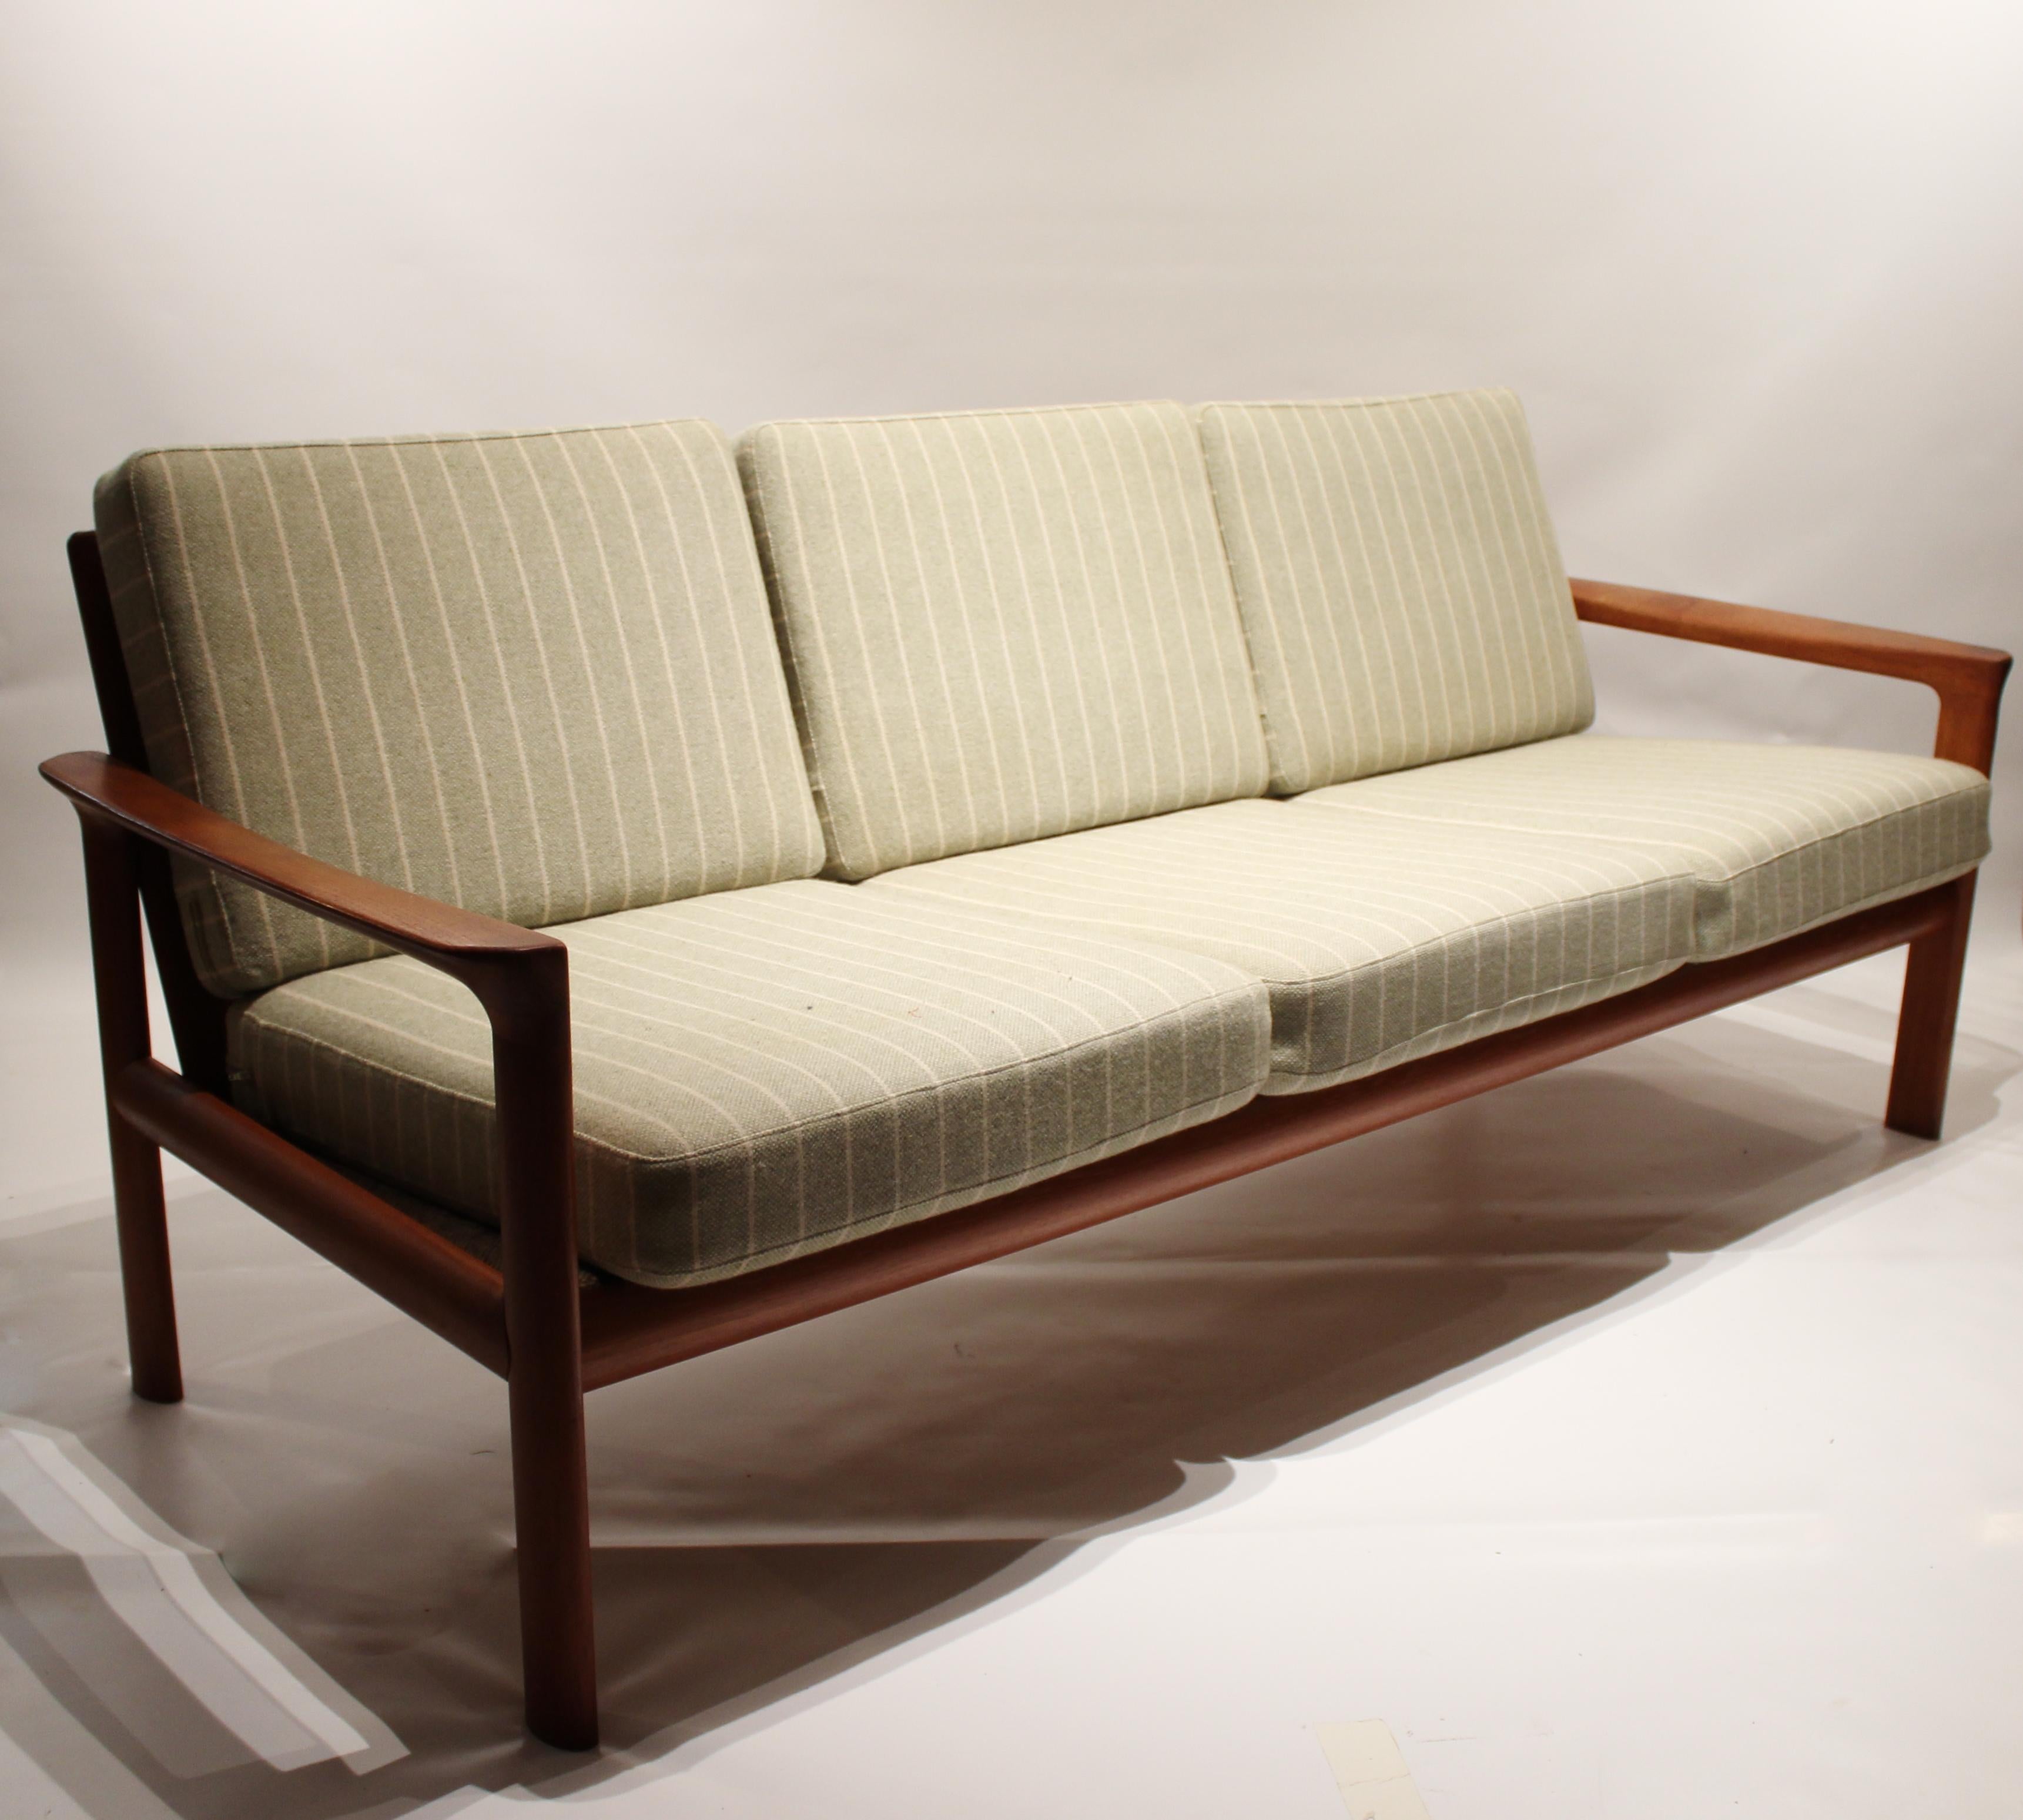 Three-seat sofa of teak and cushions upholstered in light green wool fabric designed by Svend Ellekær and manufactured by Komfort in the 1970s. The sofa is in great vintage condition.